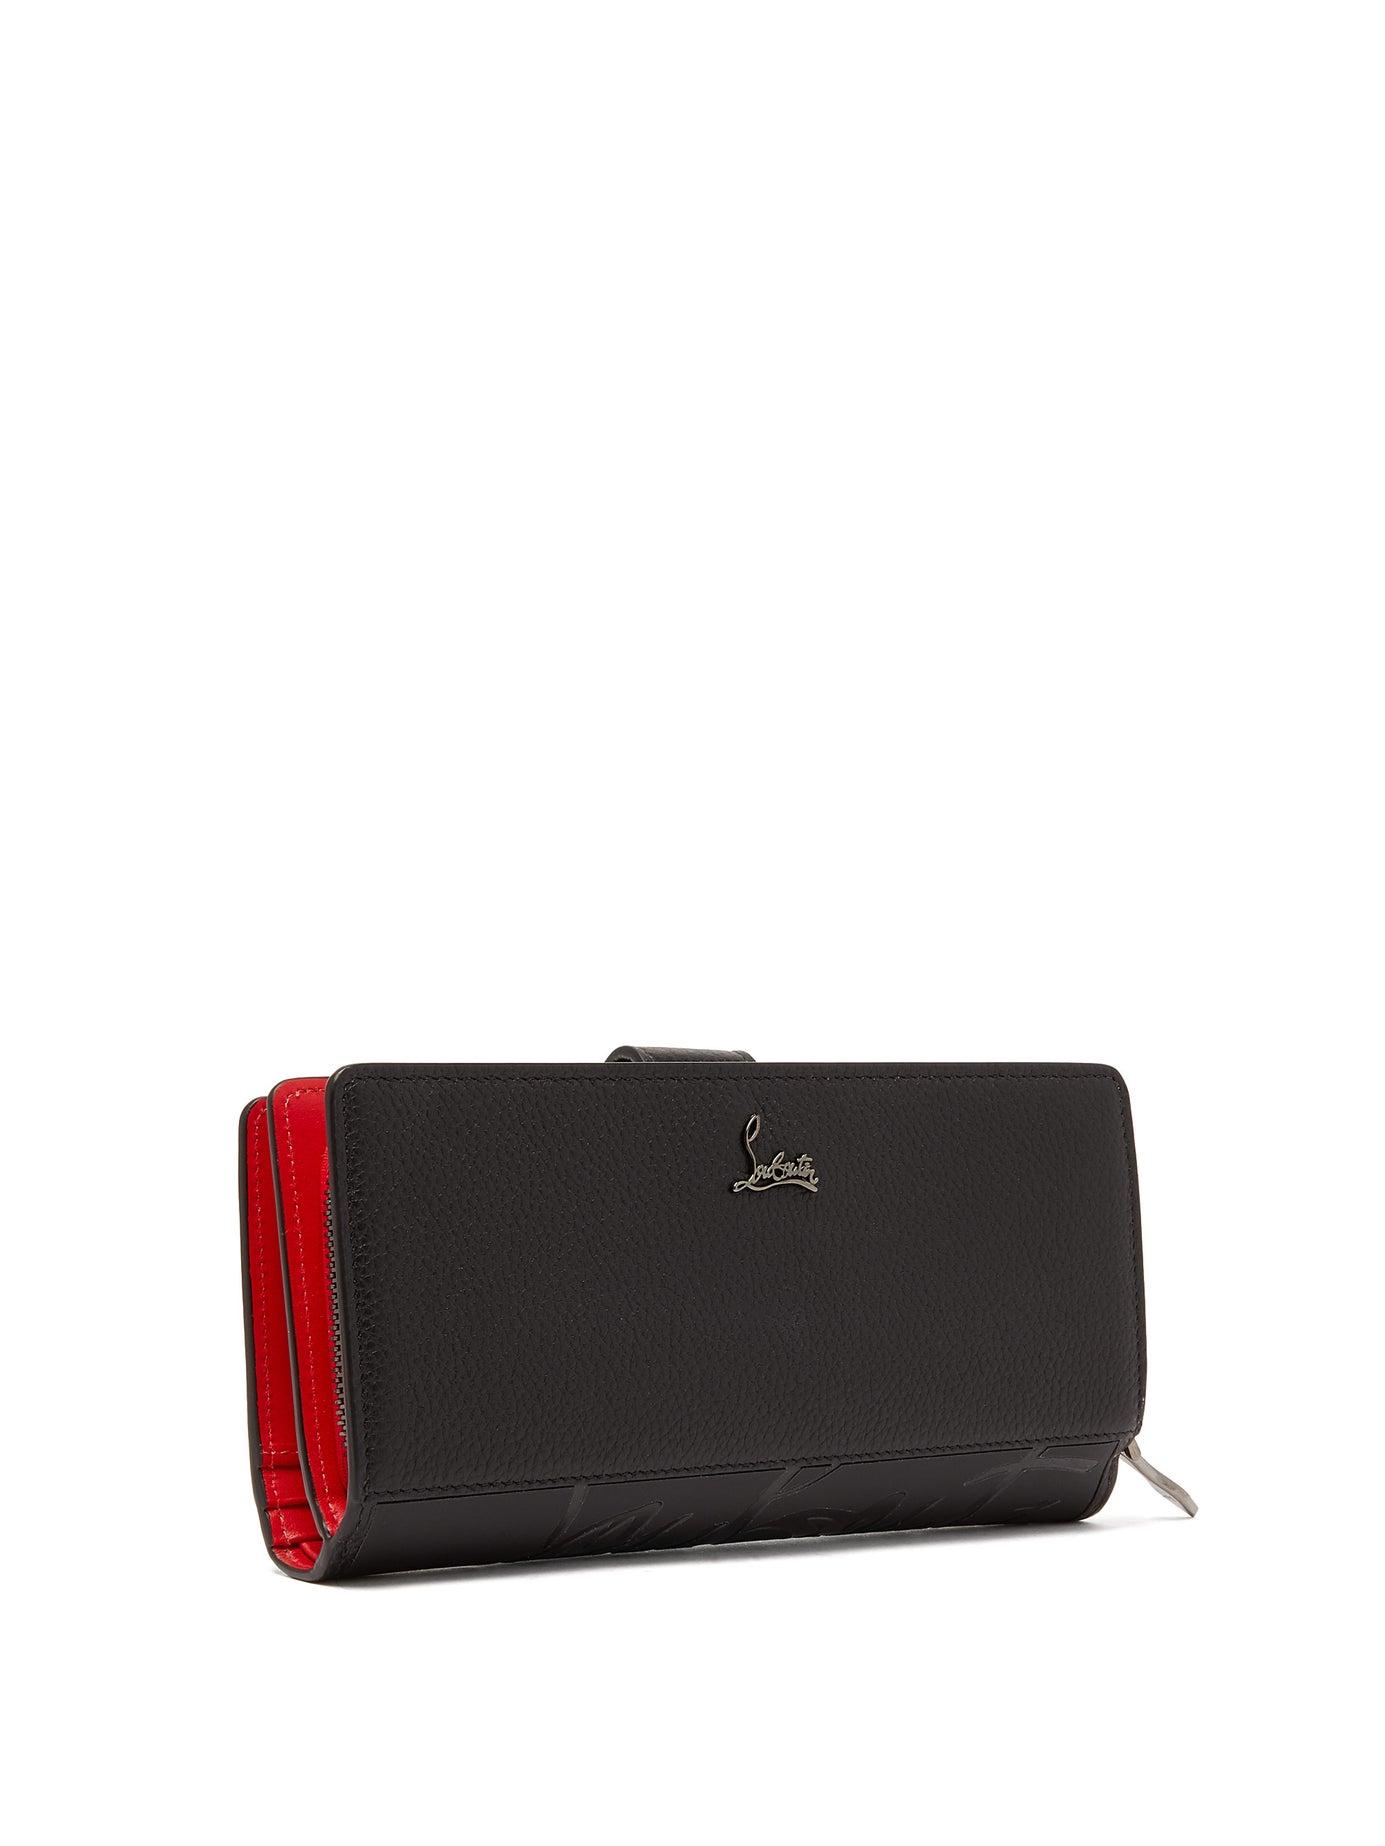 Christian Louboutin Leather Paloma Wallet in Black - Lyst